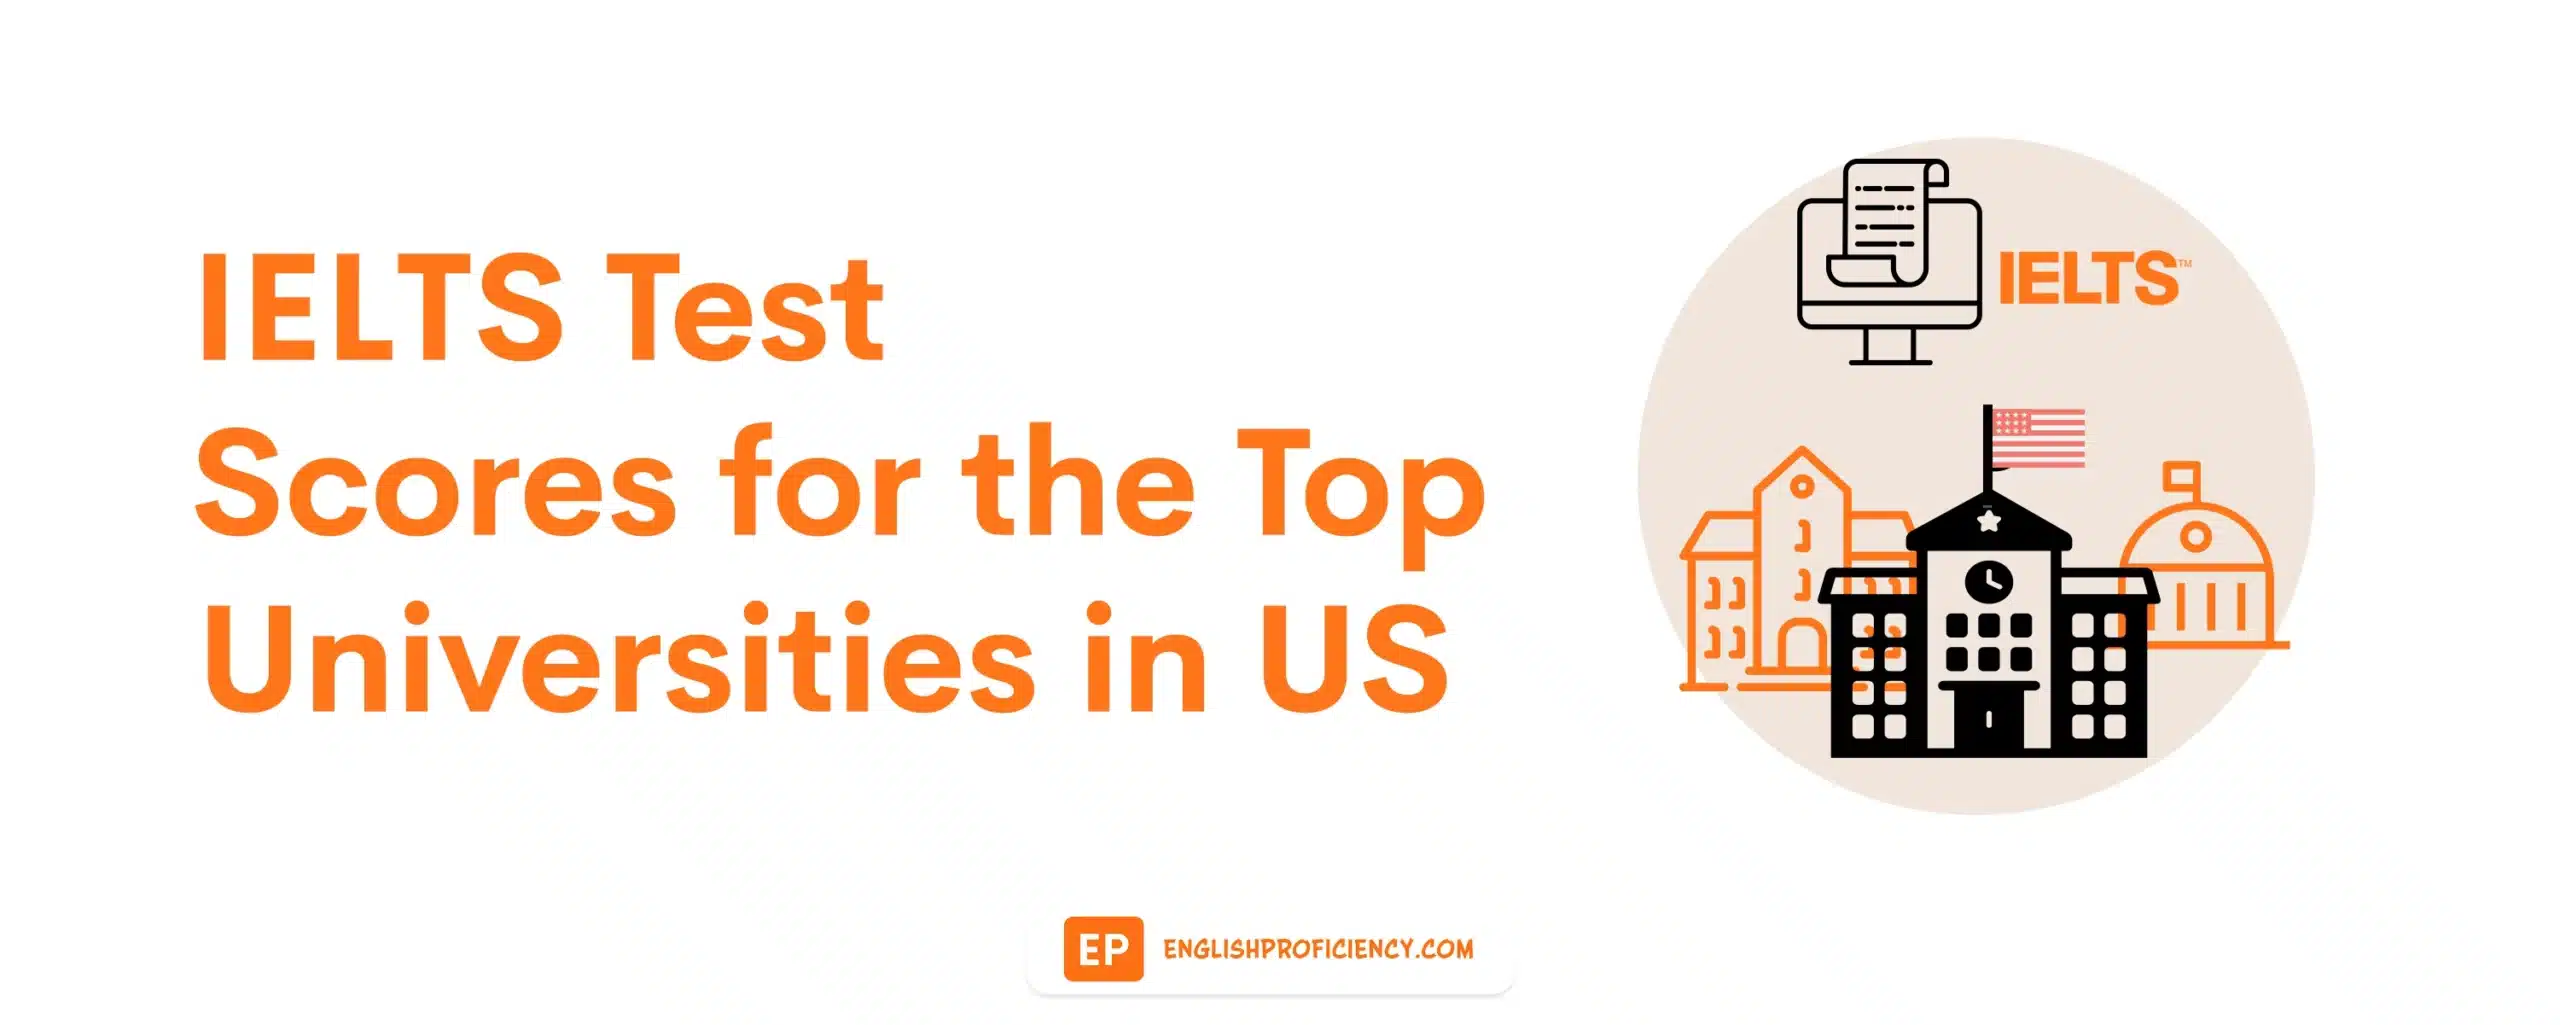 IELTS Test Scores for Top Universities in the US